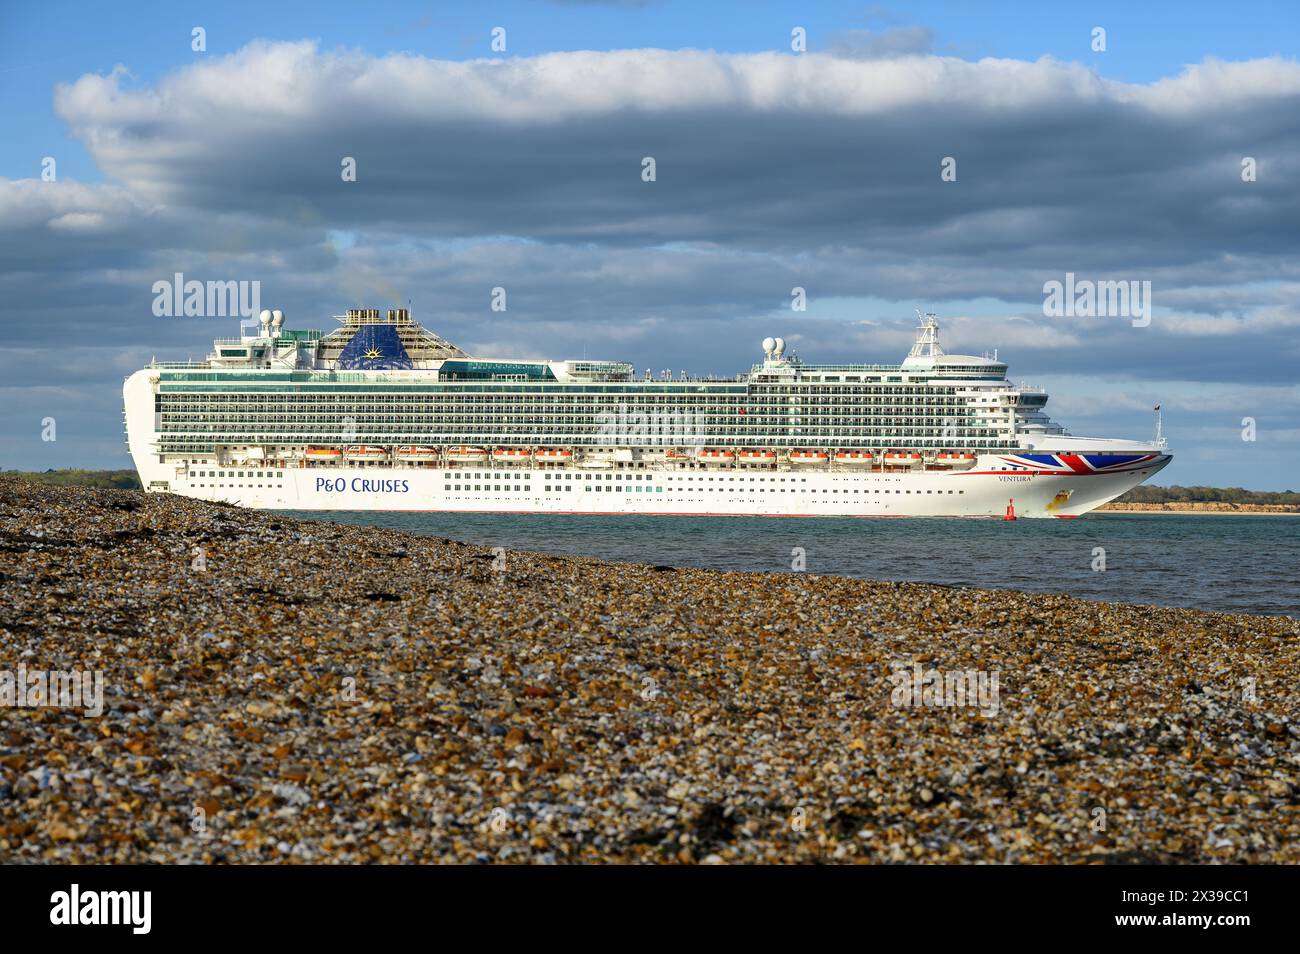 Ventura is a Grand class cruise ship operated by P&O Cruises, part of the Carnival Corporation. Stock Photo